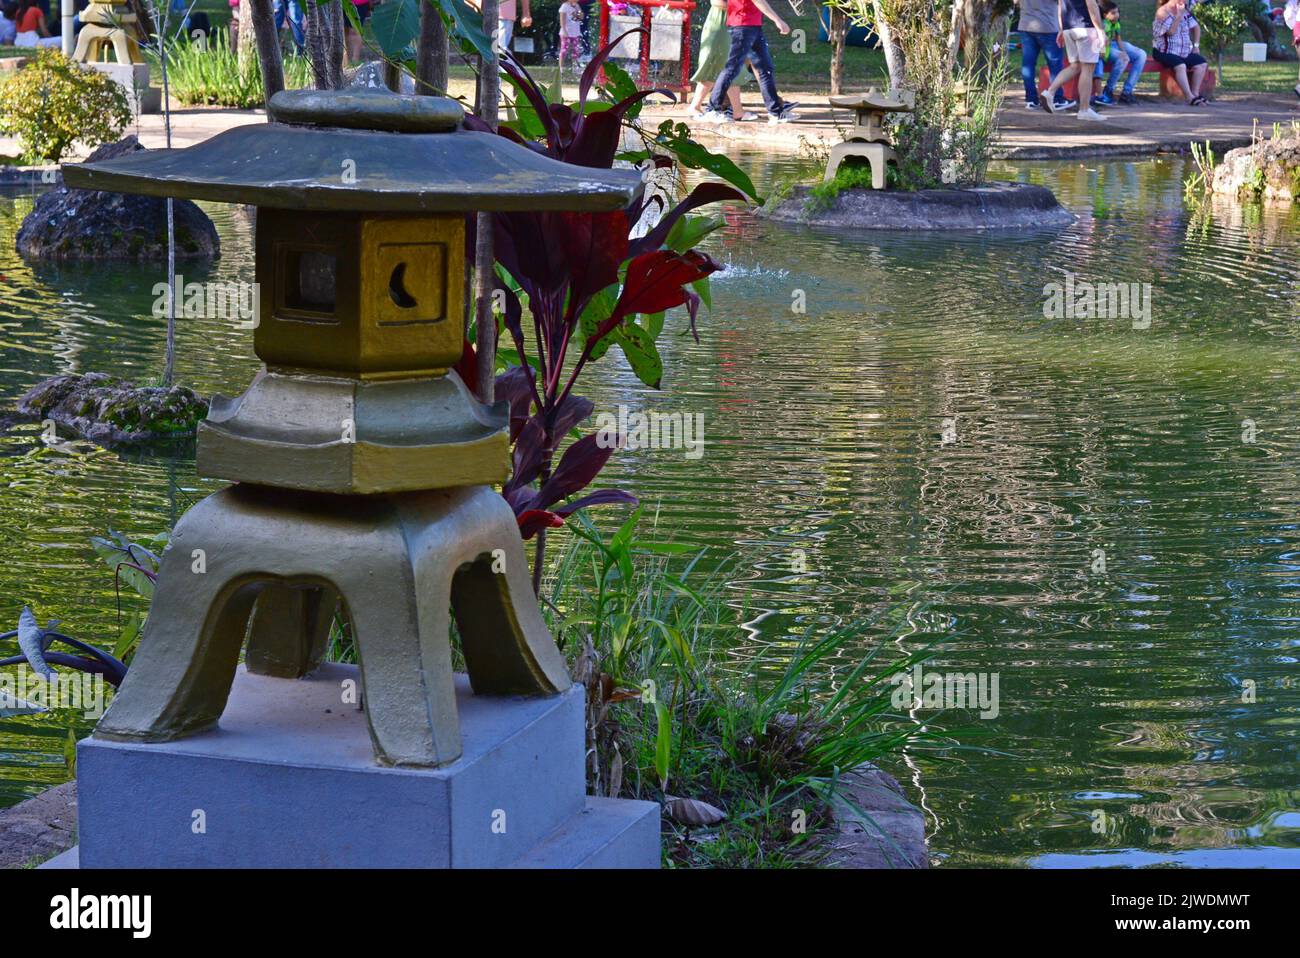 Stone lantern in Japanese garden at cherry blossom festival in the countryside of Brazil, in the background tourists visiting the place Stock Photo